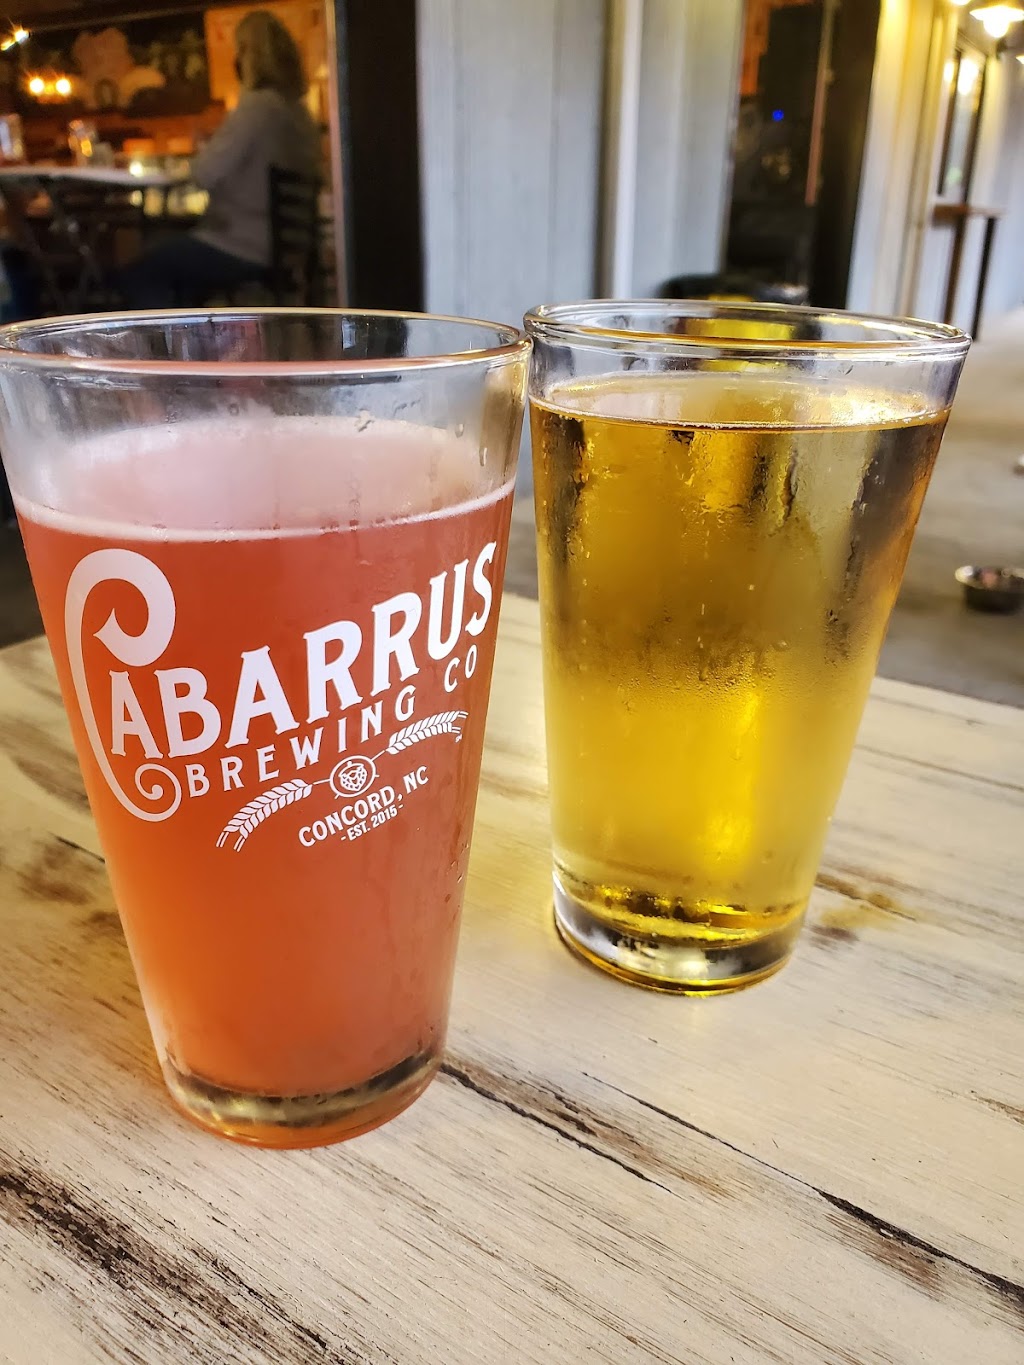 Cabarrus Brewing Company | 329 McGill Ave NW, Concord, NC 28027 | Phone: (704) 490-4487